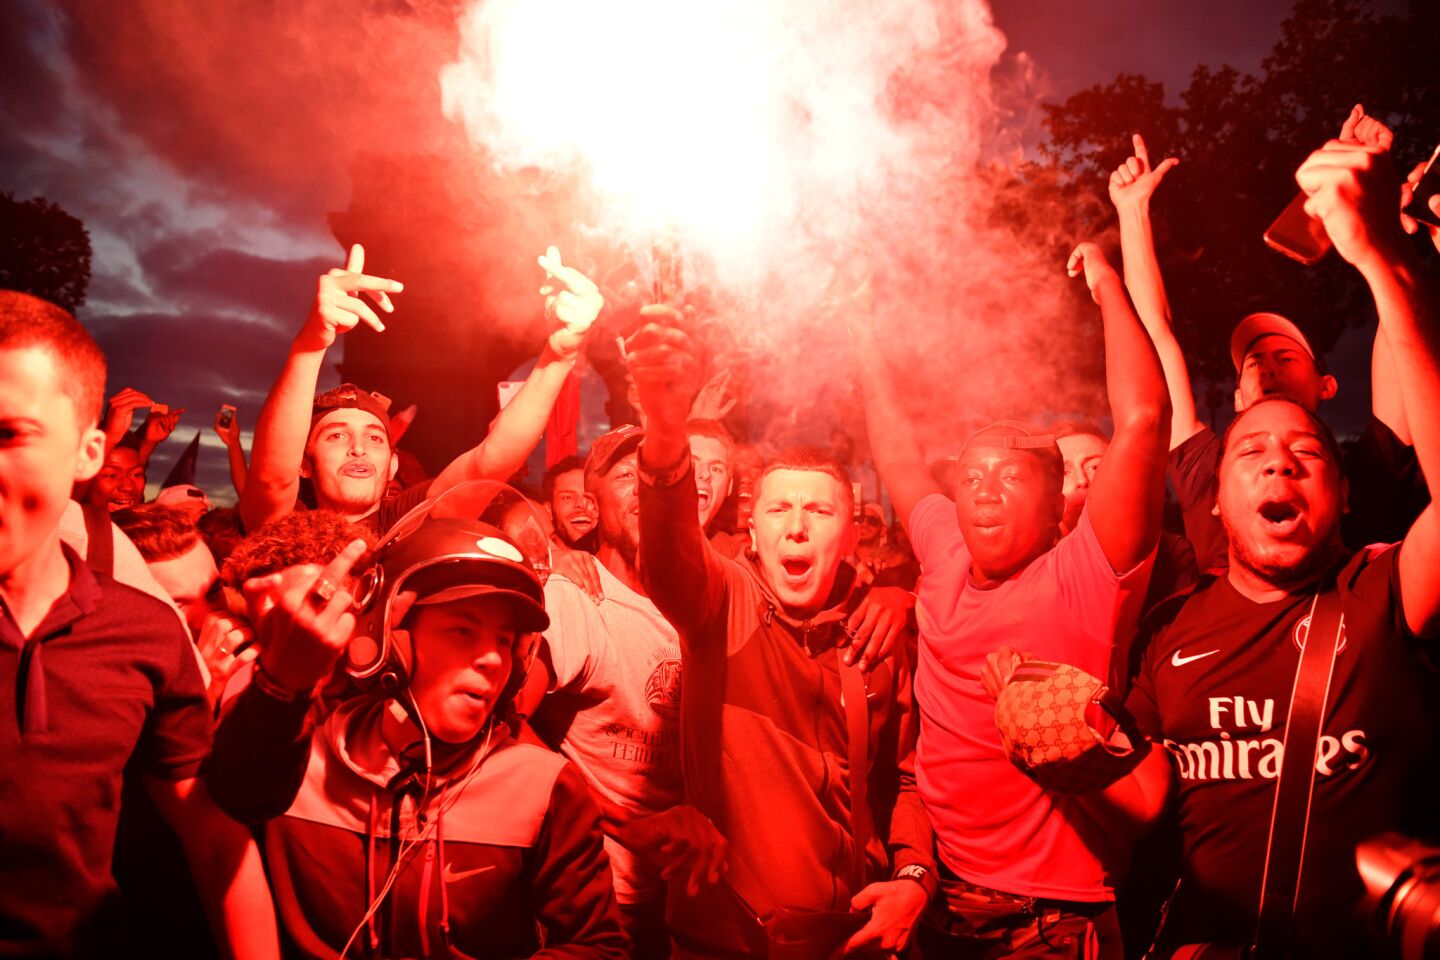 Fans celebrate on the Champs Elysees after France beat Belgium 1-0 to advance to the finals of the World Cup.